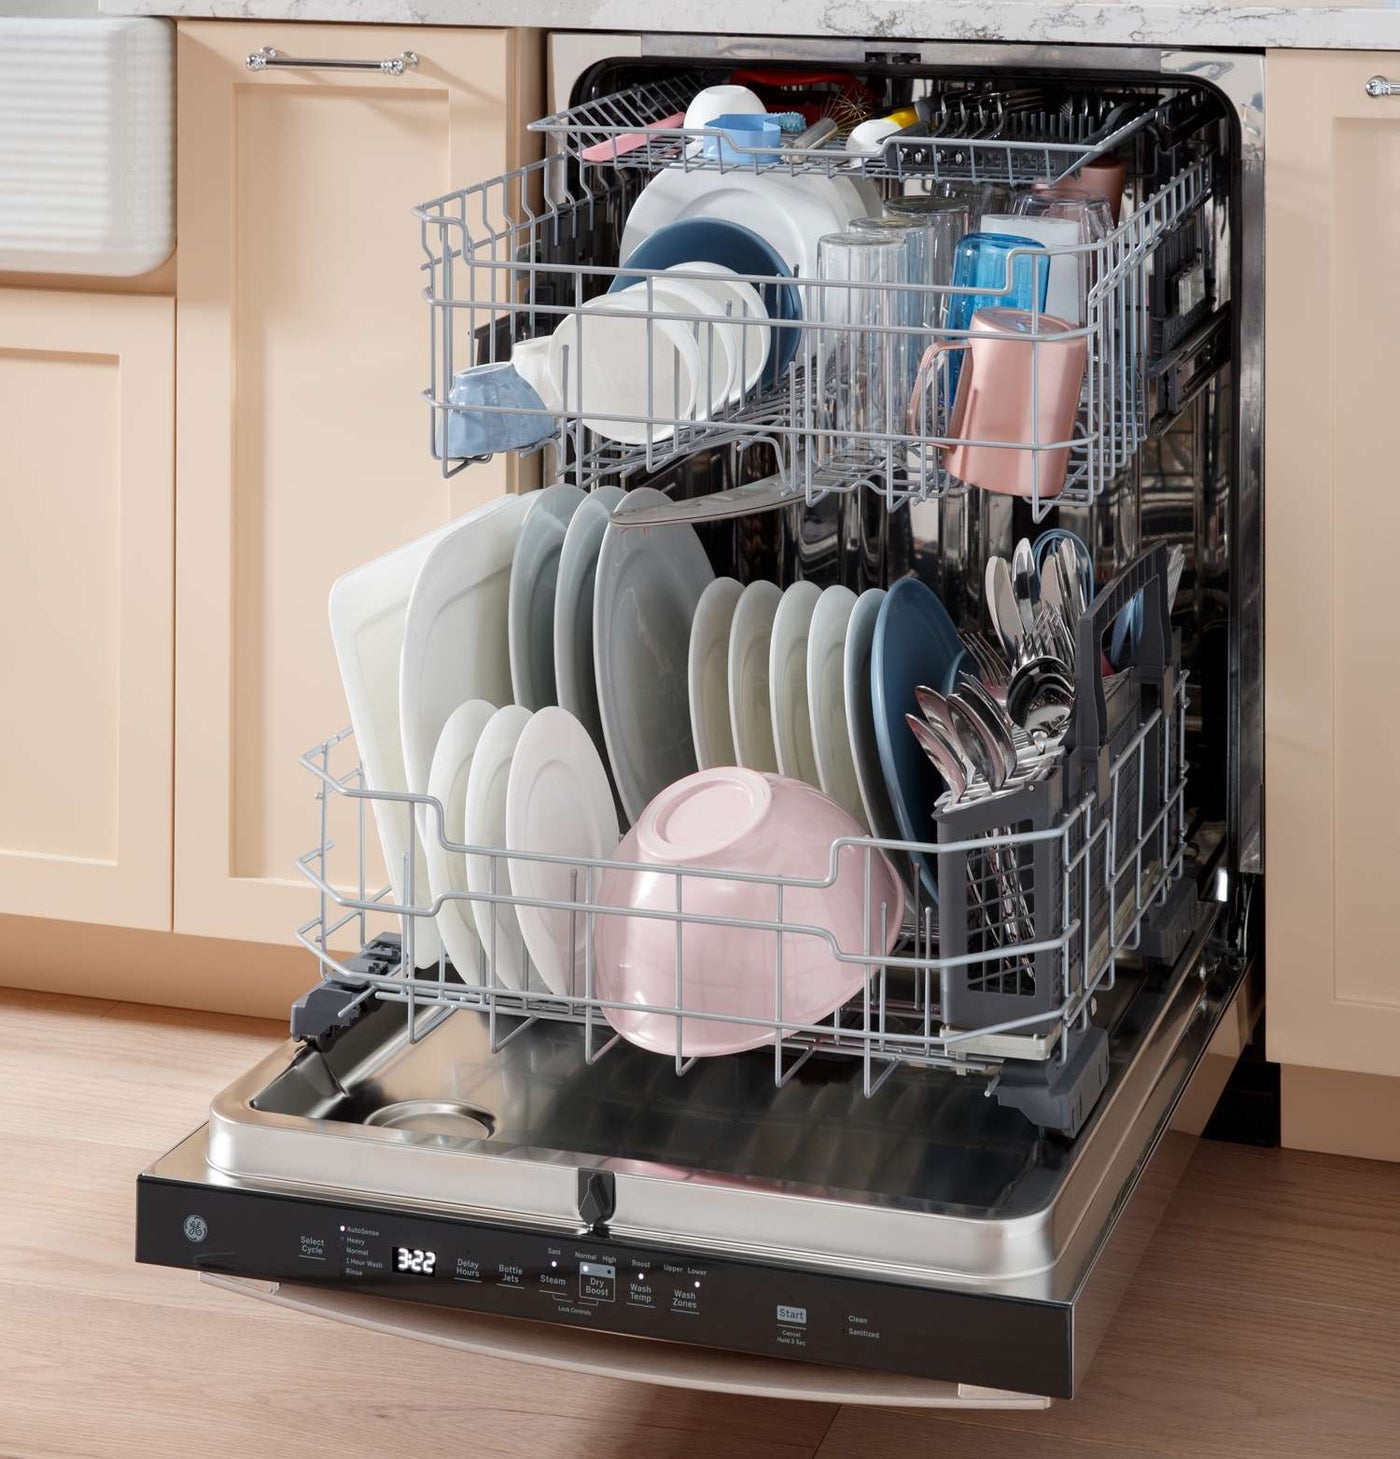 GE 24" Slate Top Control Dishwasher with Stainless Steel Interior and Third Rack - GDT650SMVES